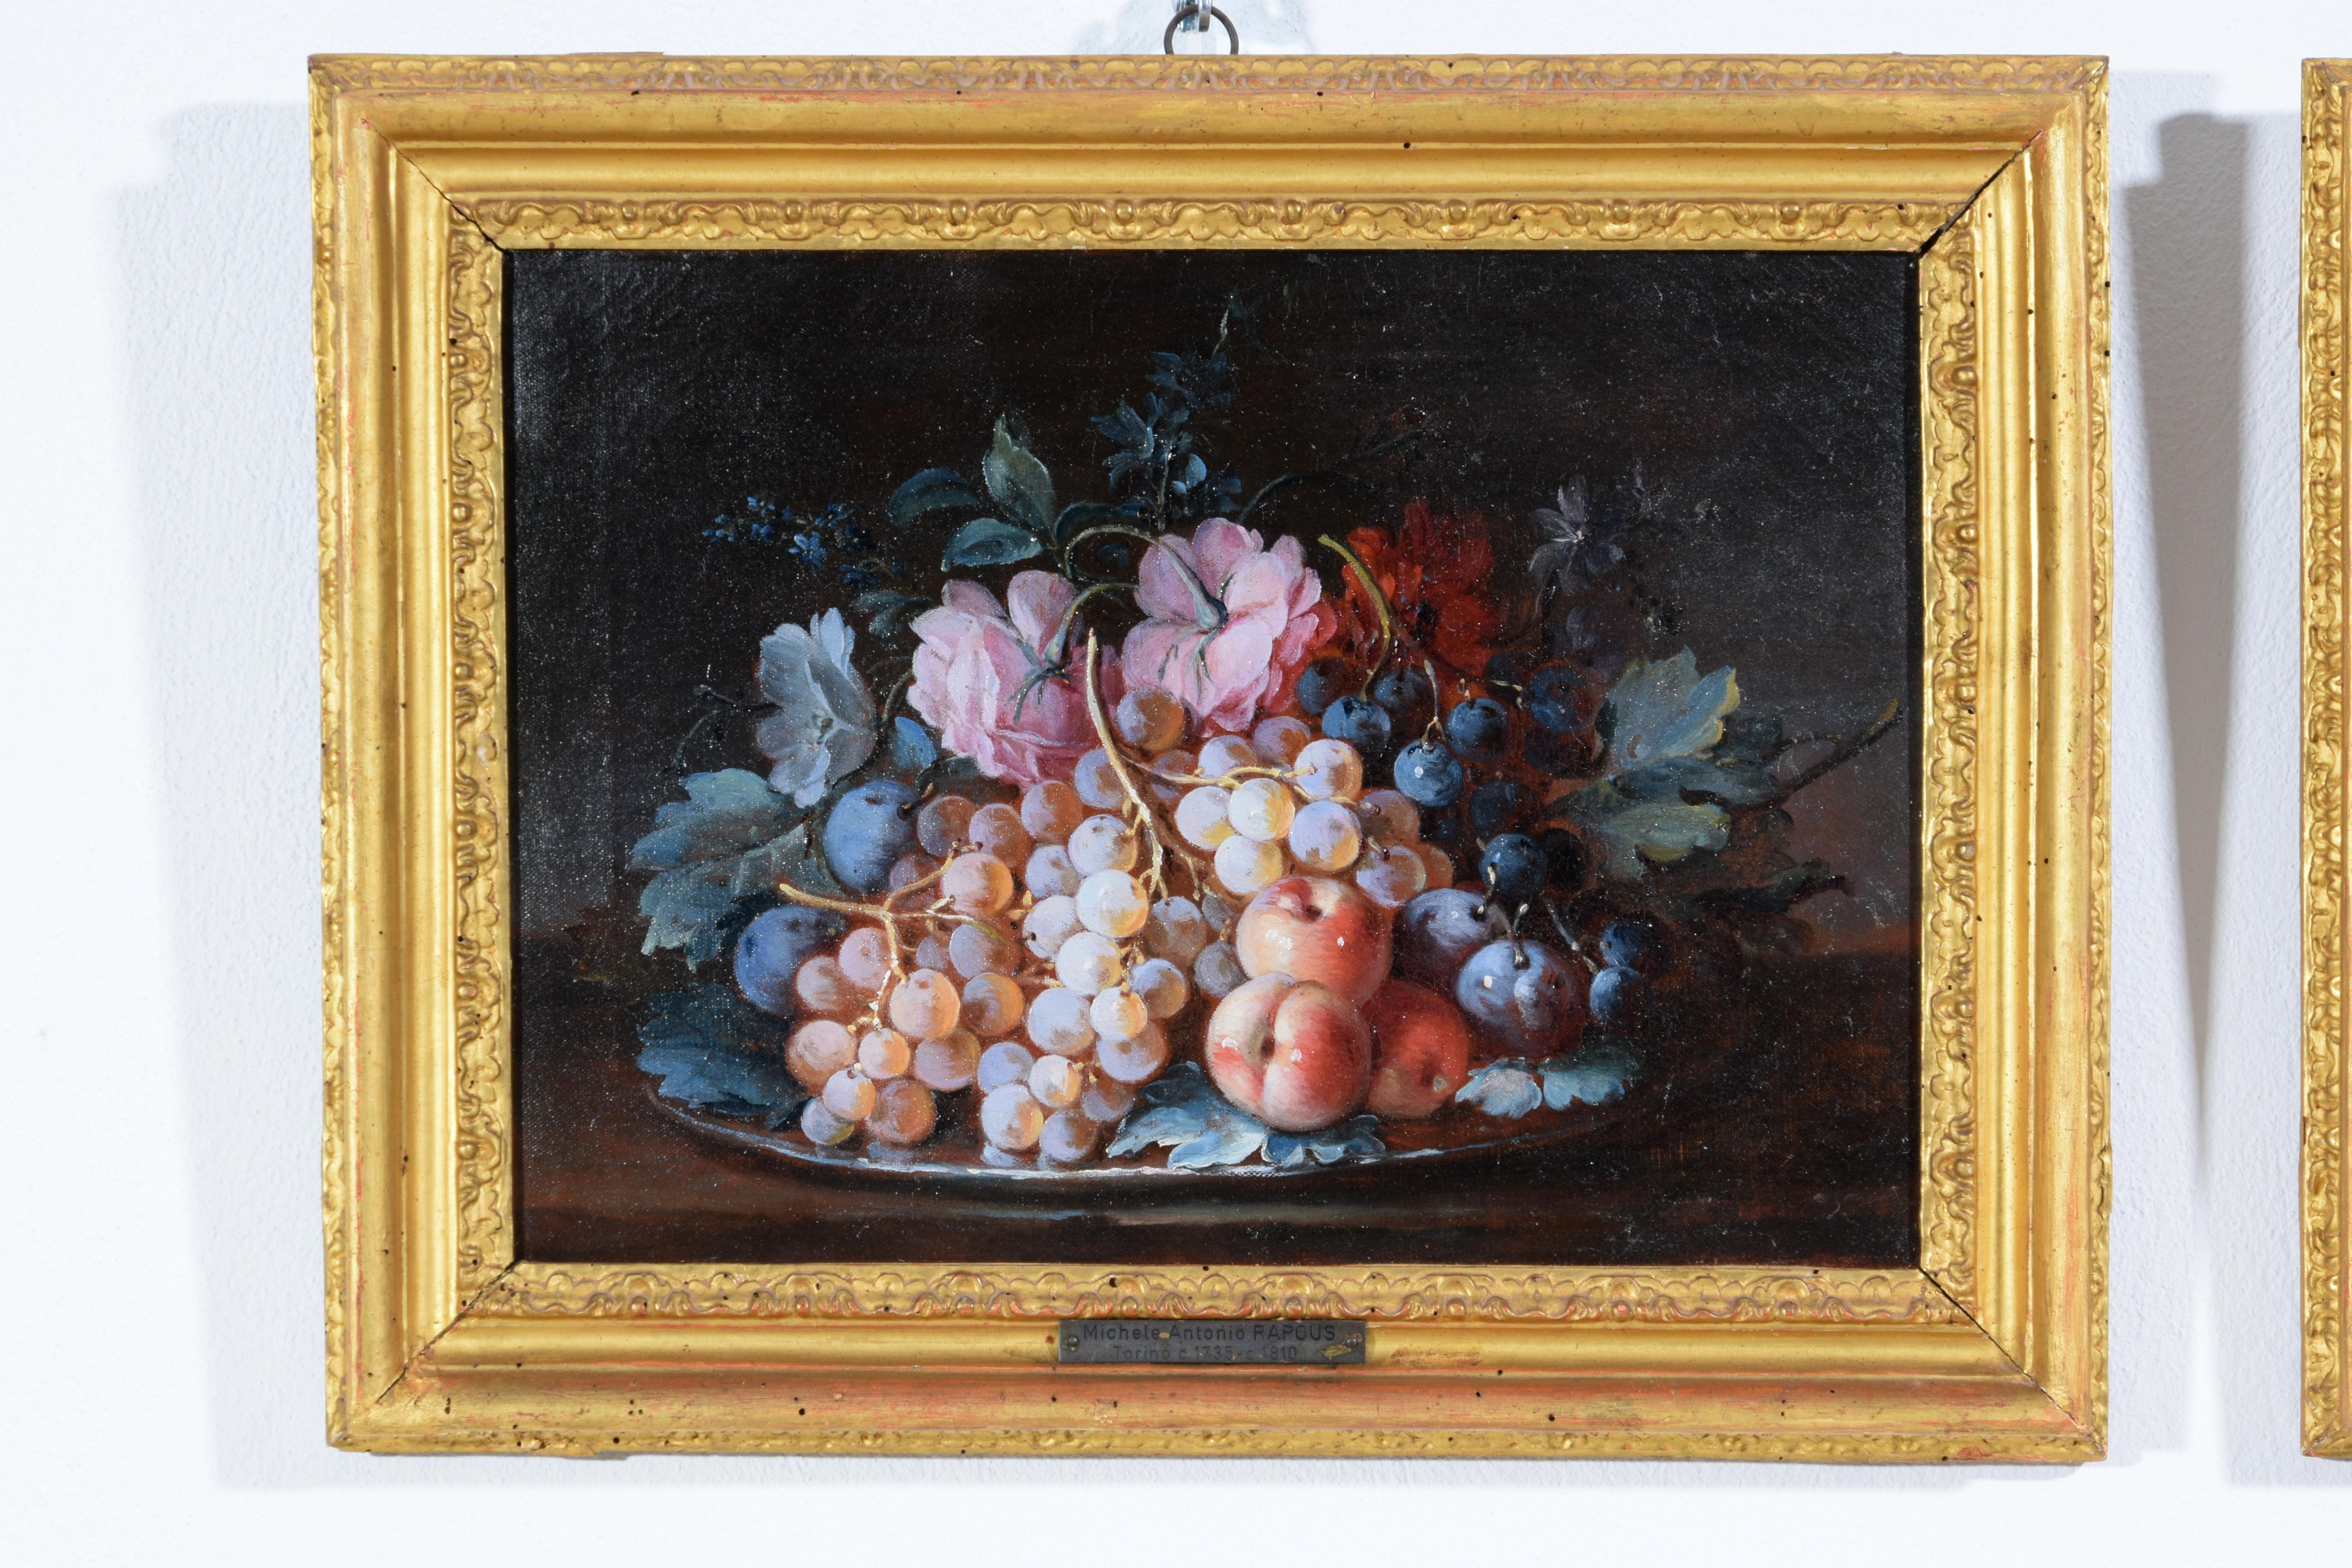 18th Century, Pair Italian Rococo Still Life Painting by Michele Antonio Rapous For Sale 14